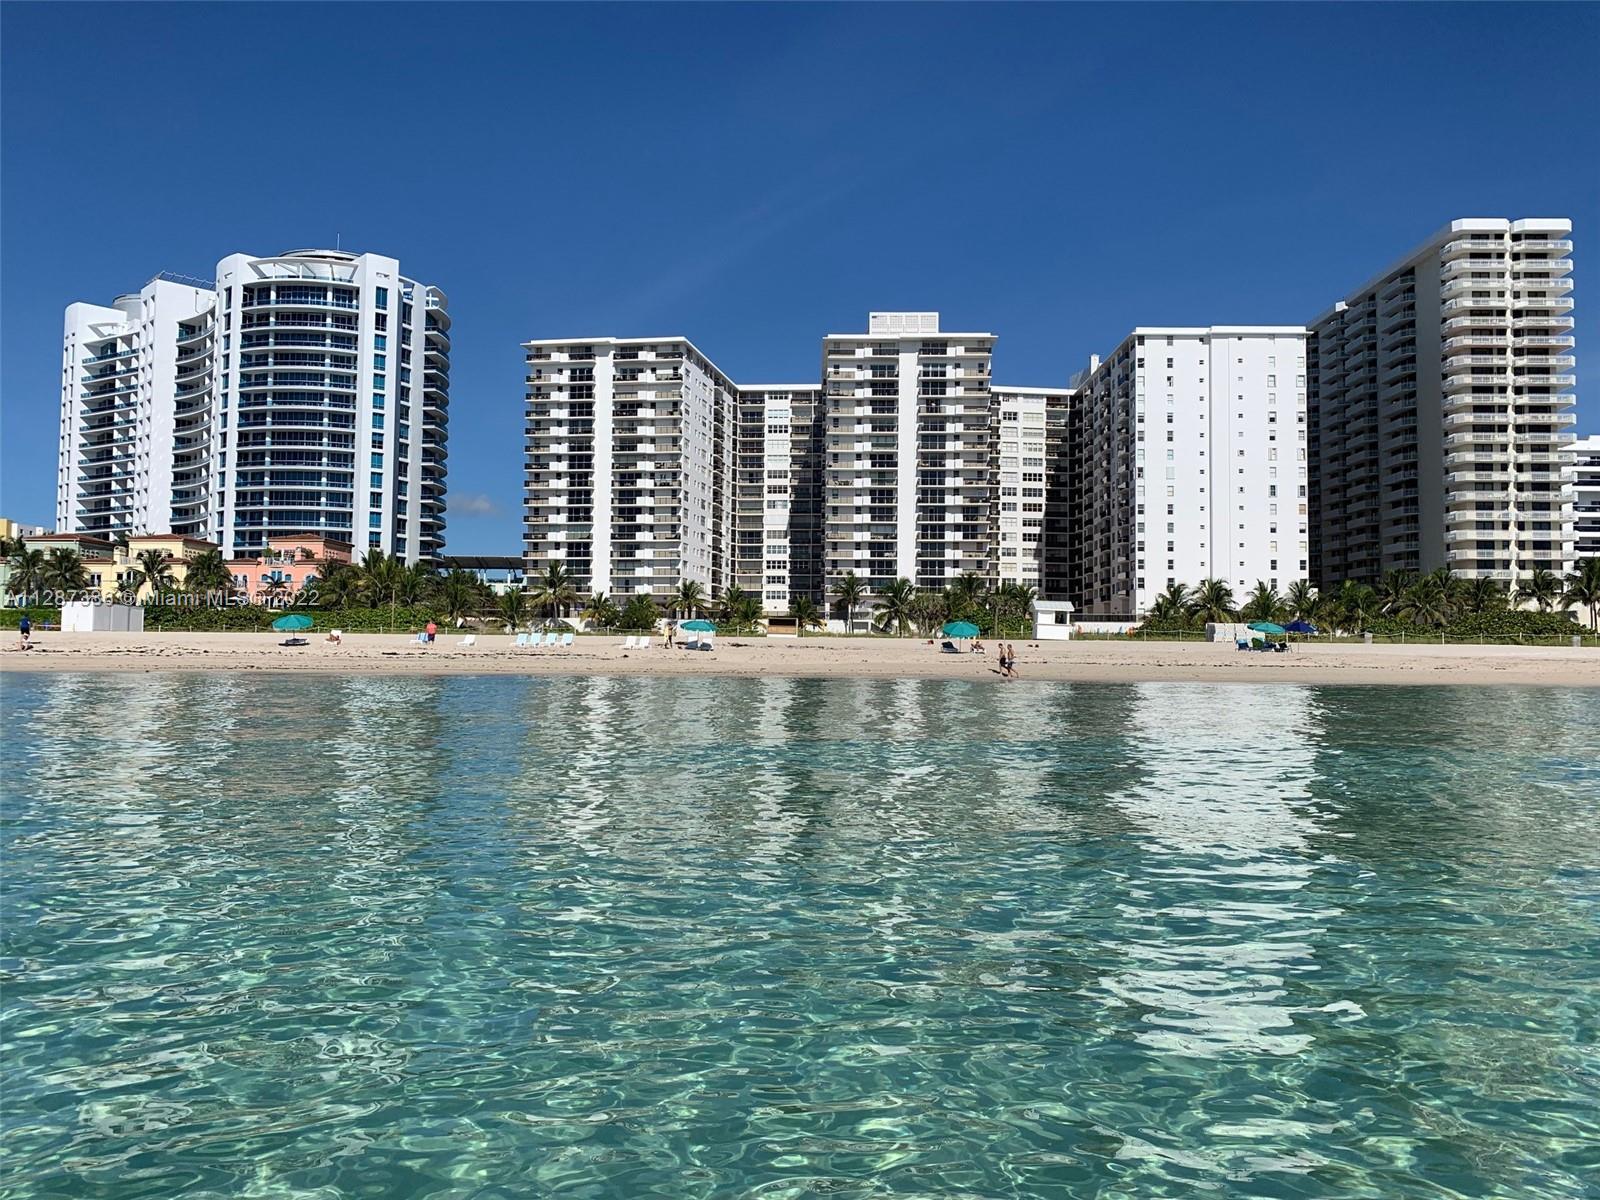 a view of water with tall buildings